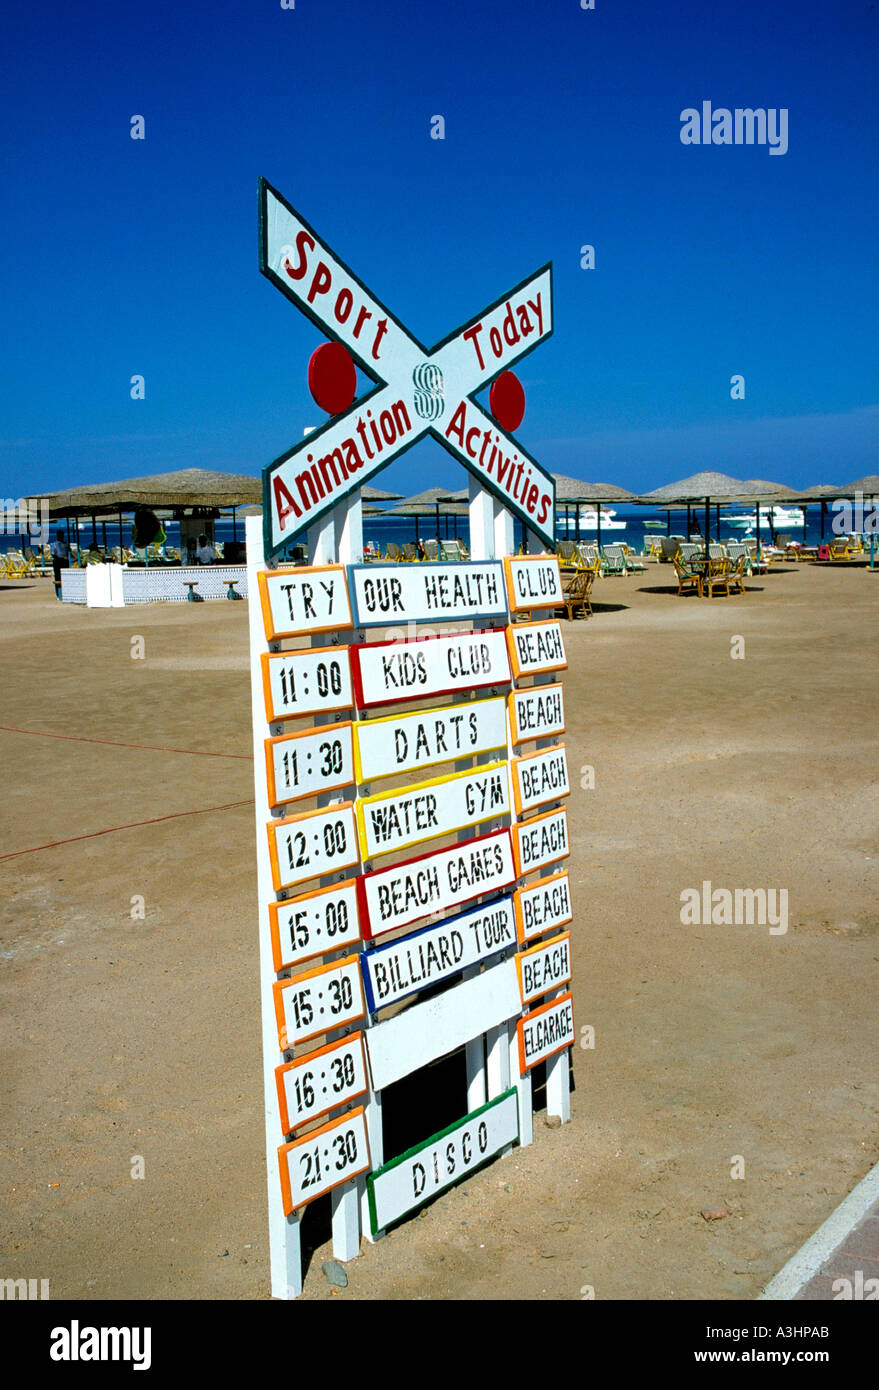 signs for animation today resort of hurghada red sea egypt Stock Photo